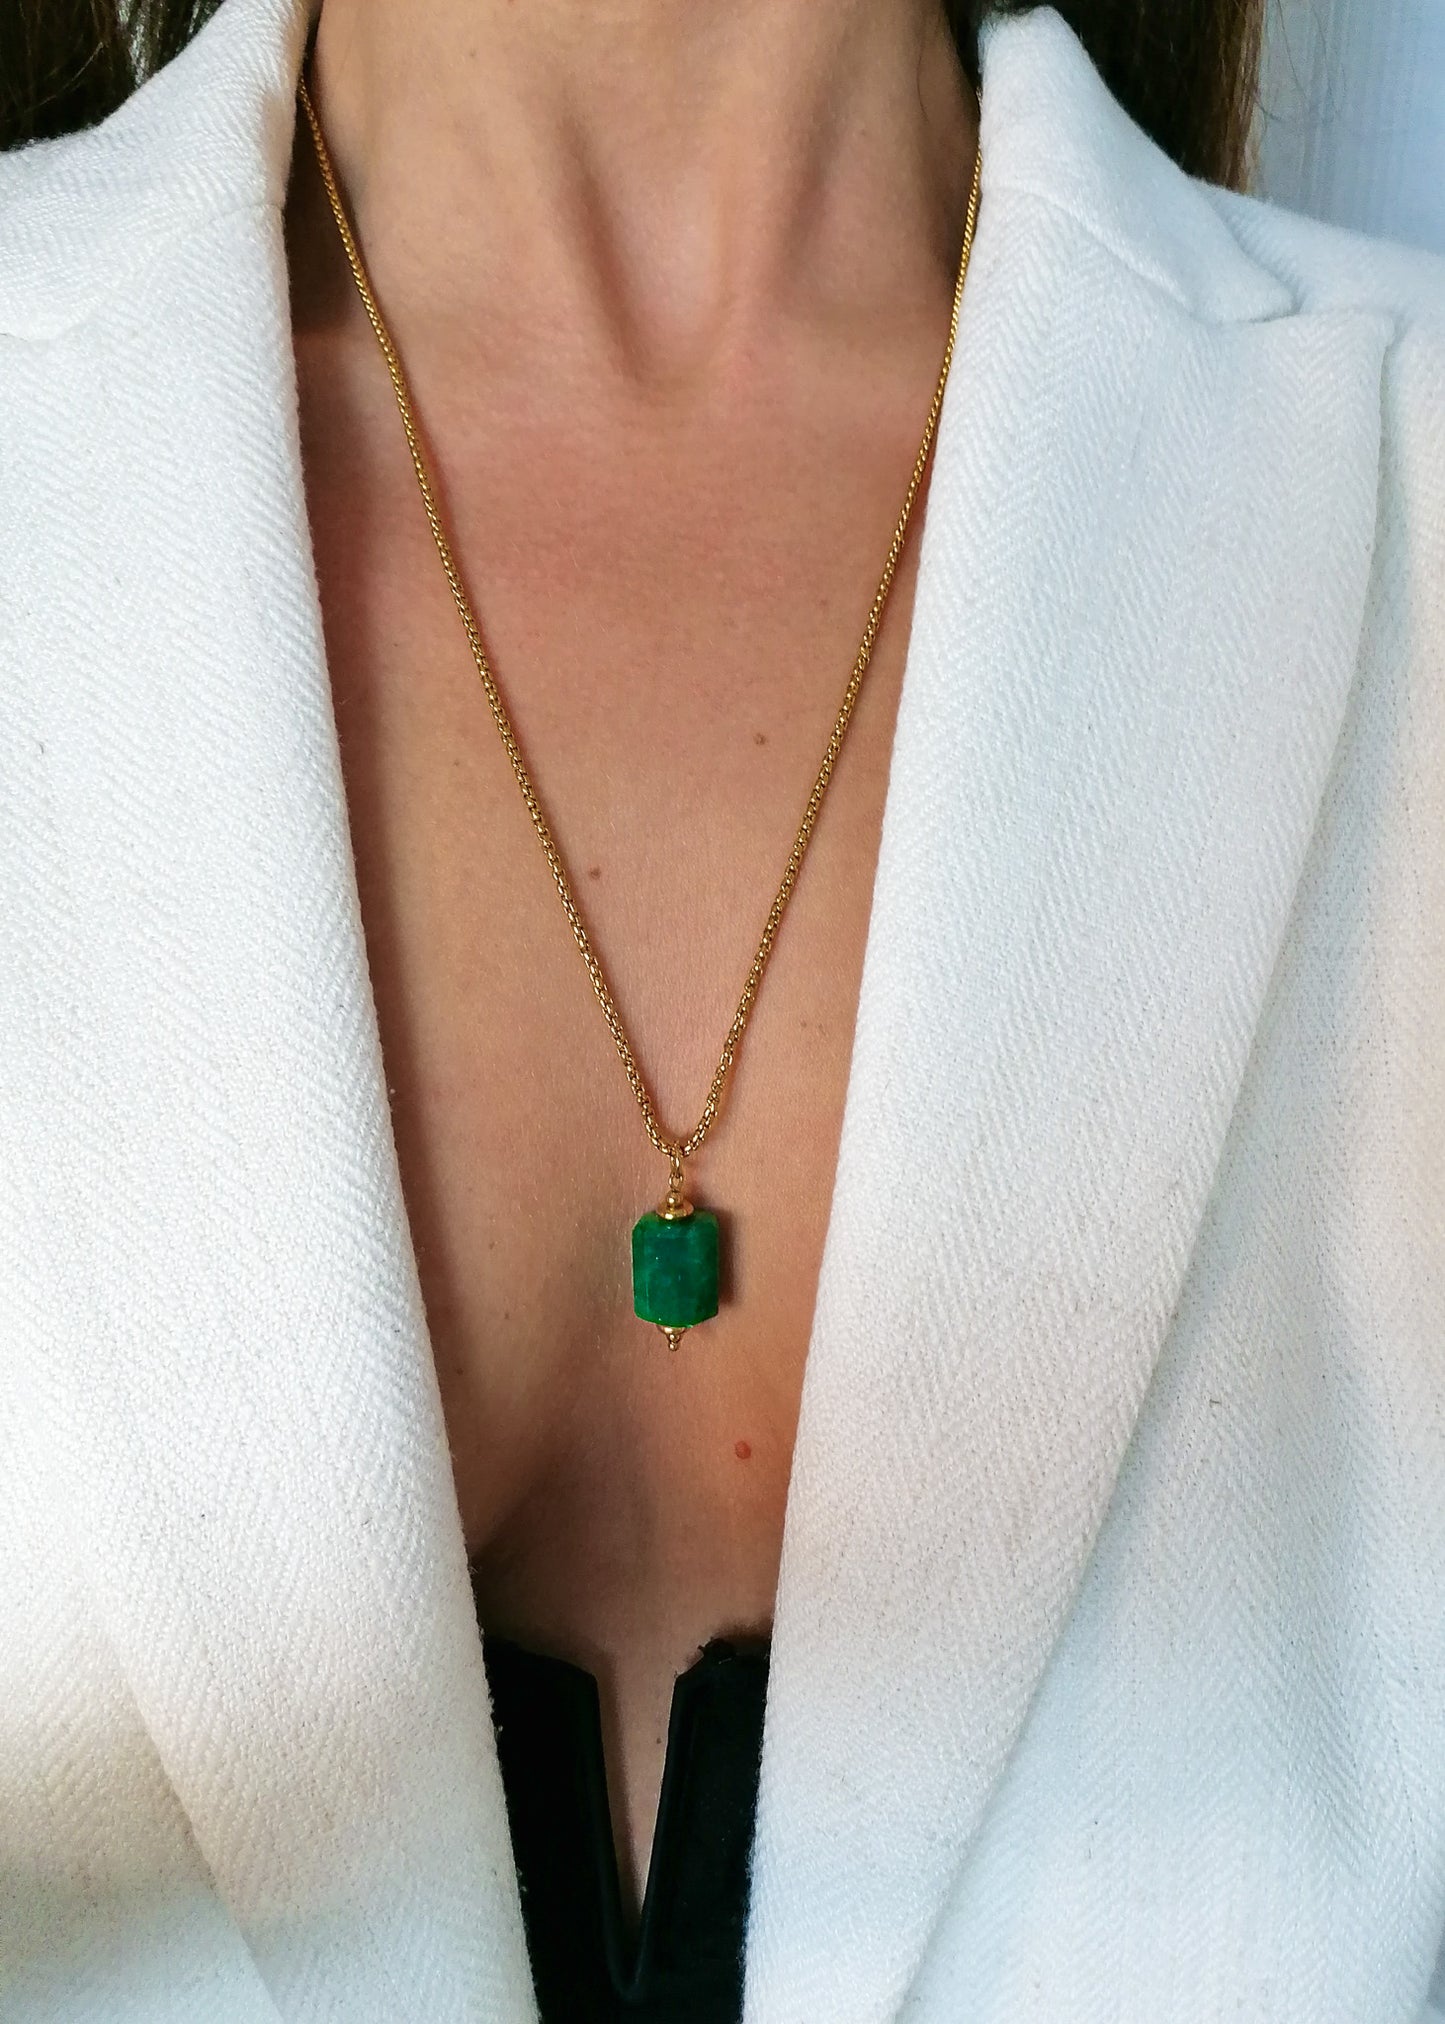 Emerald necklace - long box chain